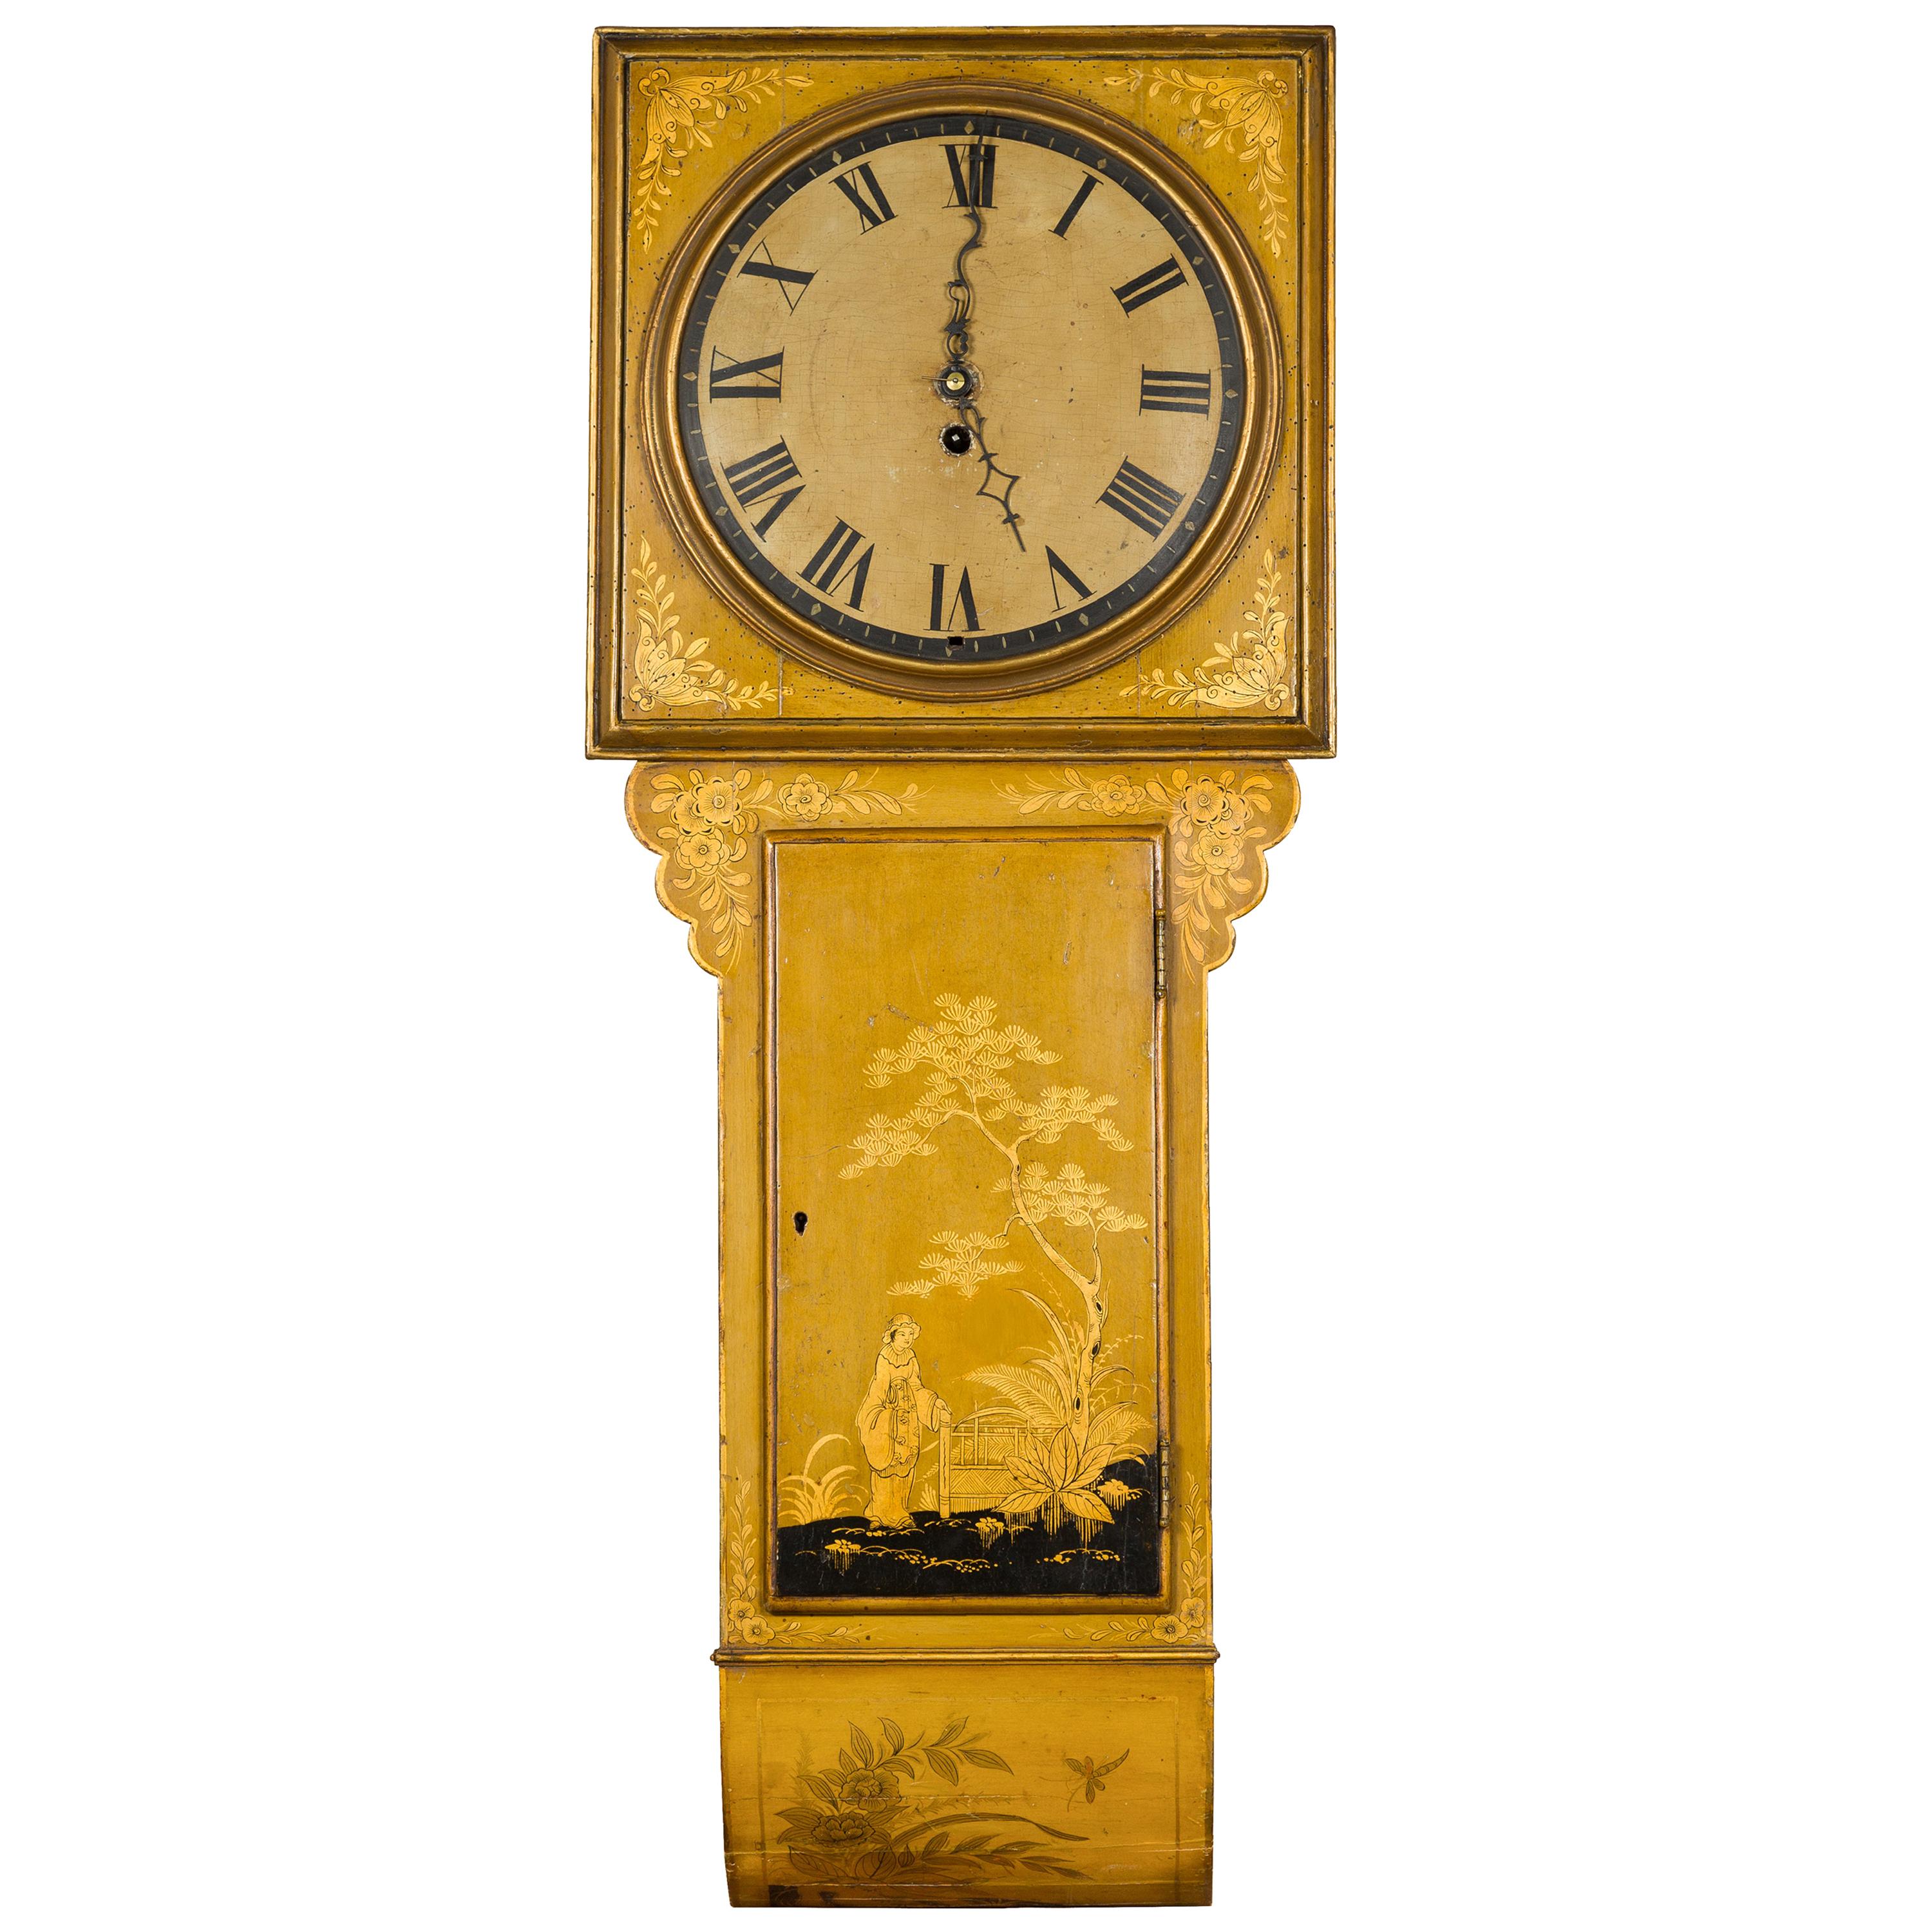 English Regency Period 1820s Golden Toned Wall Clock with Chinoiserie Décor For Sale